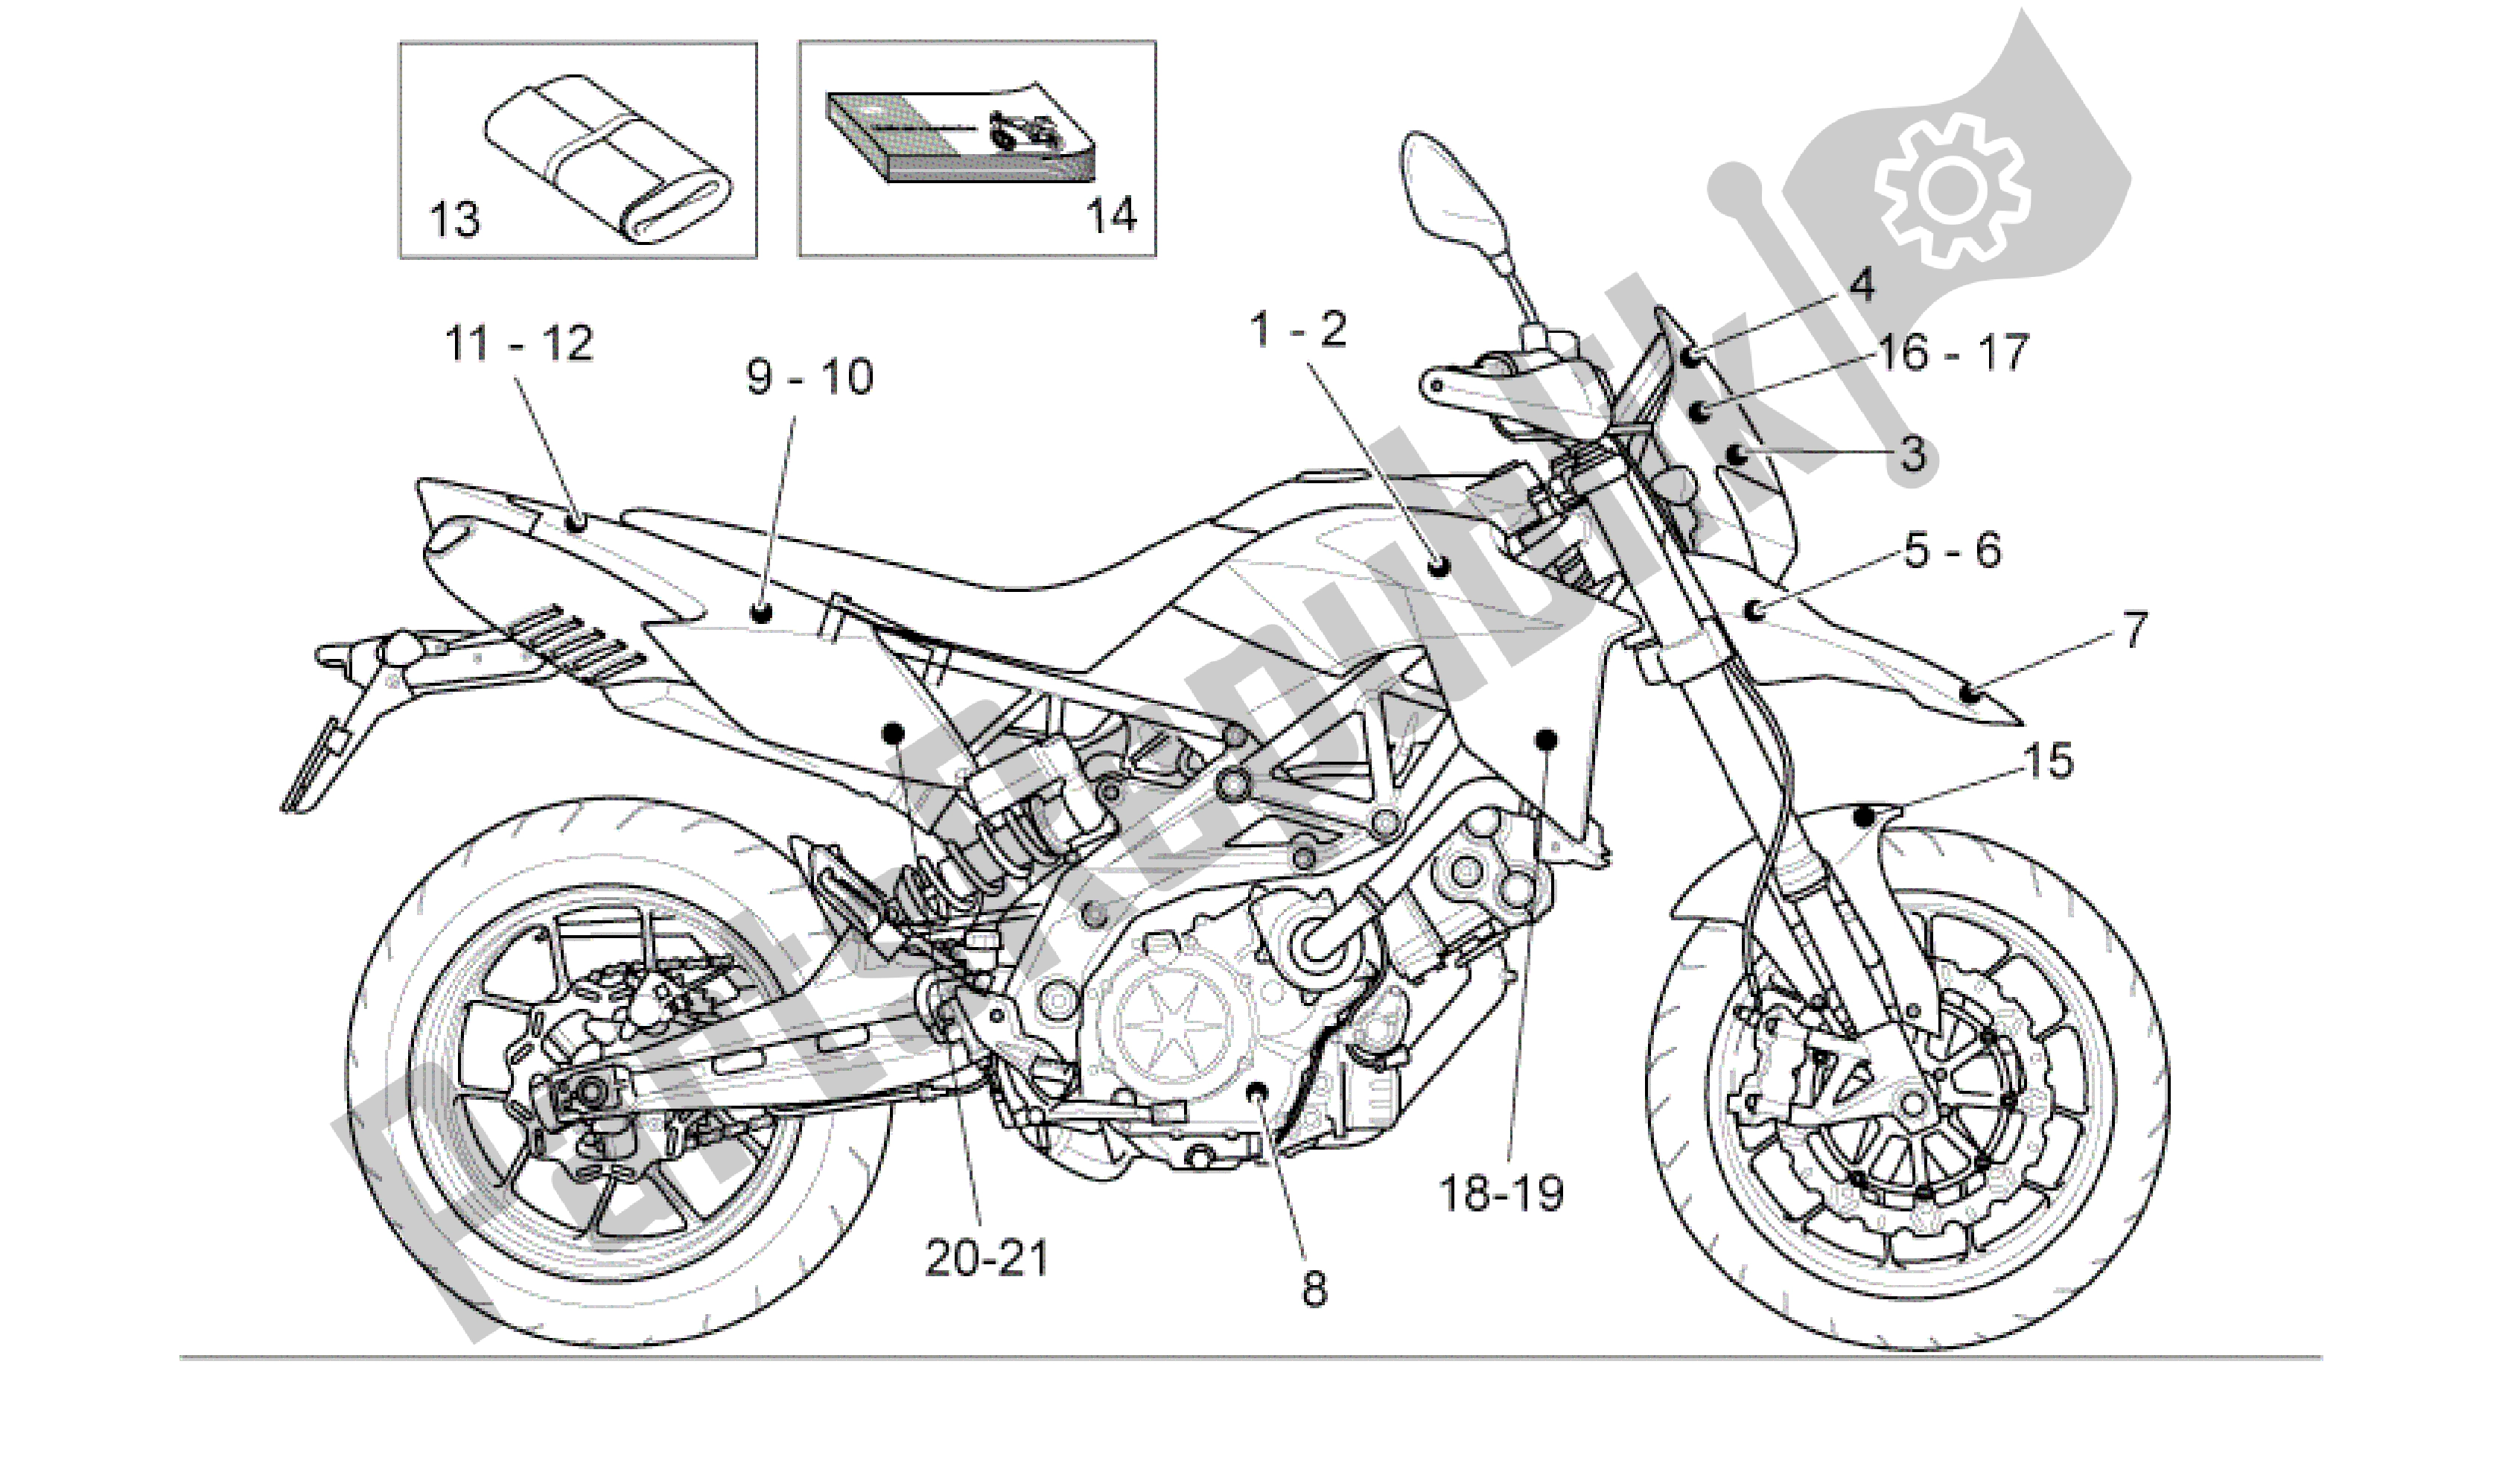 All parts for the Decal -toolkit of the Aprilia Dorsoduro 750 2008 - 2011